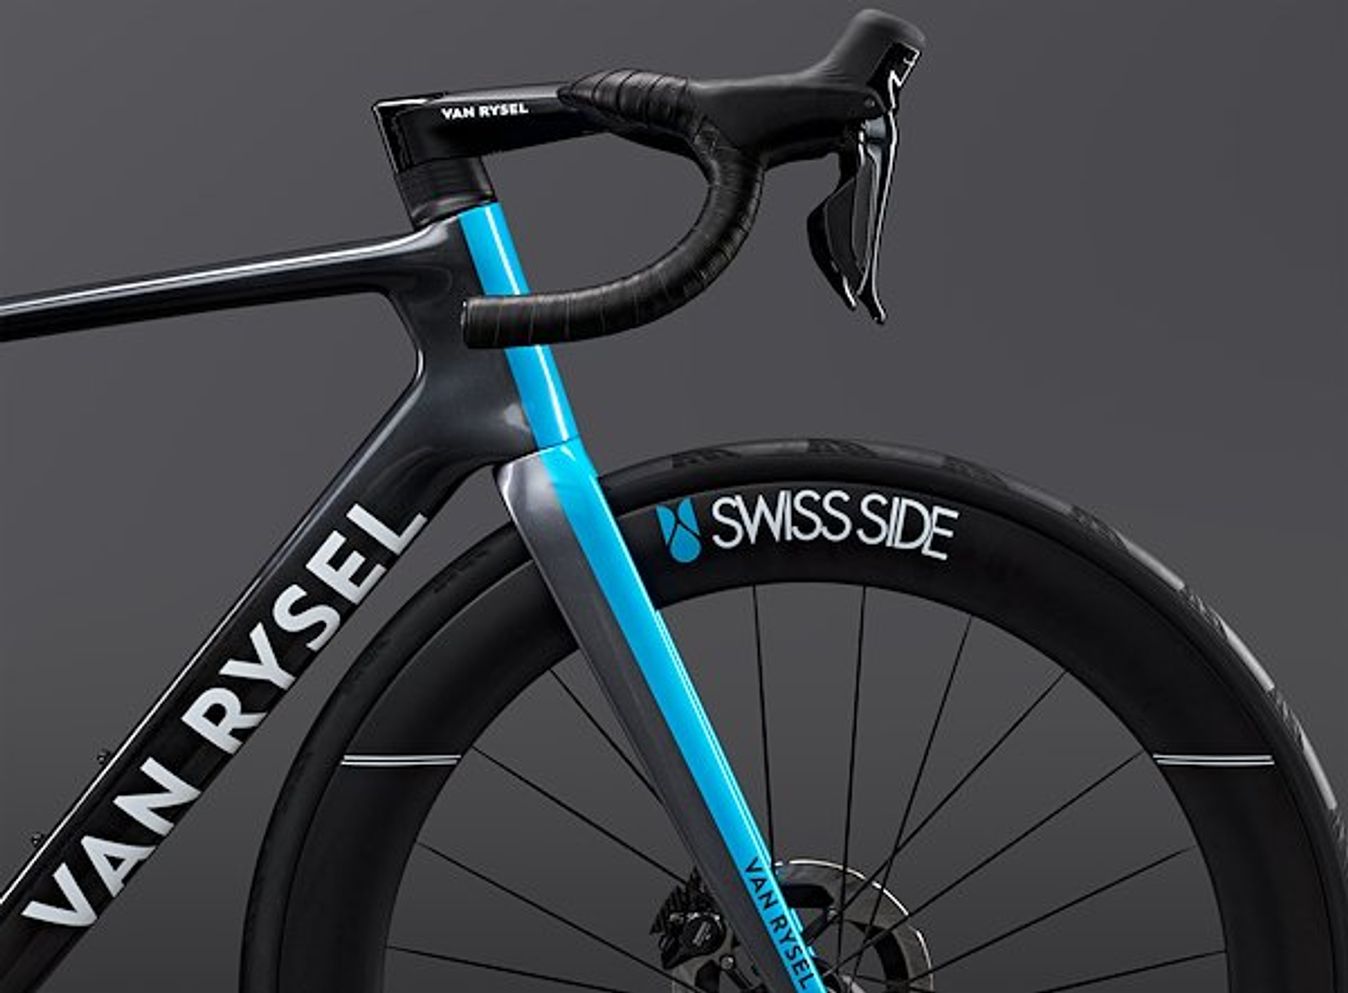 Gallery: AG2R's Van Rysel RCR Pro, the new name in the WorldTour